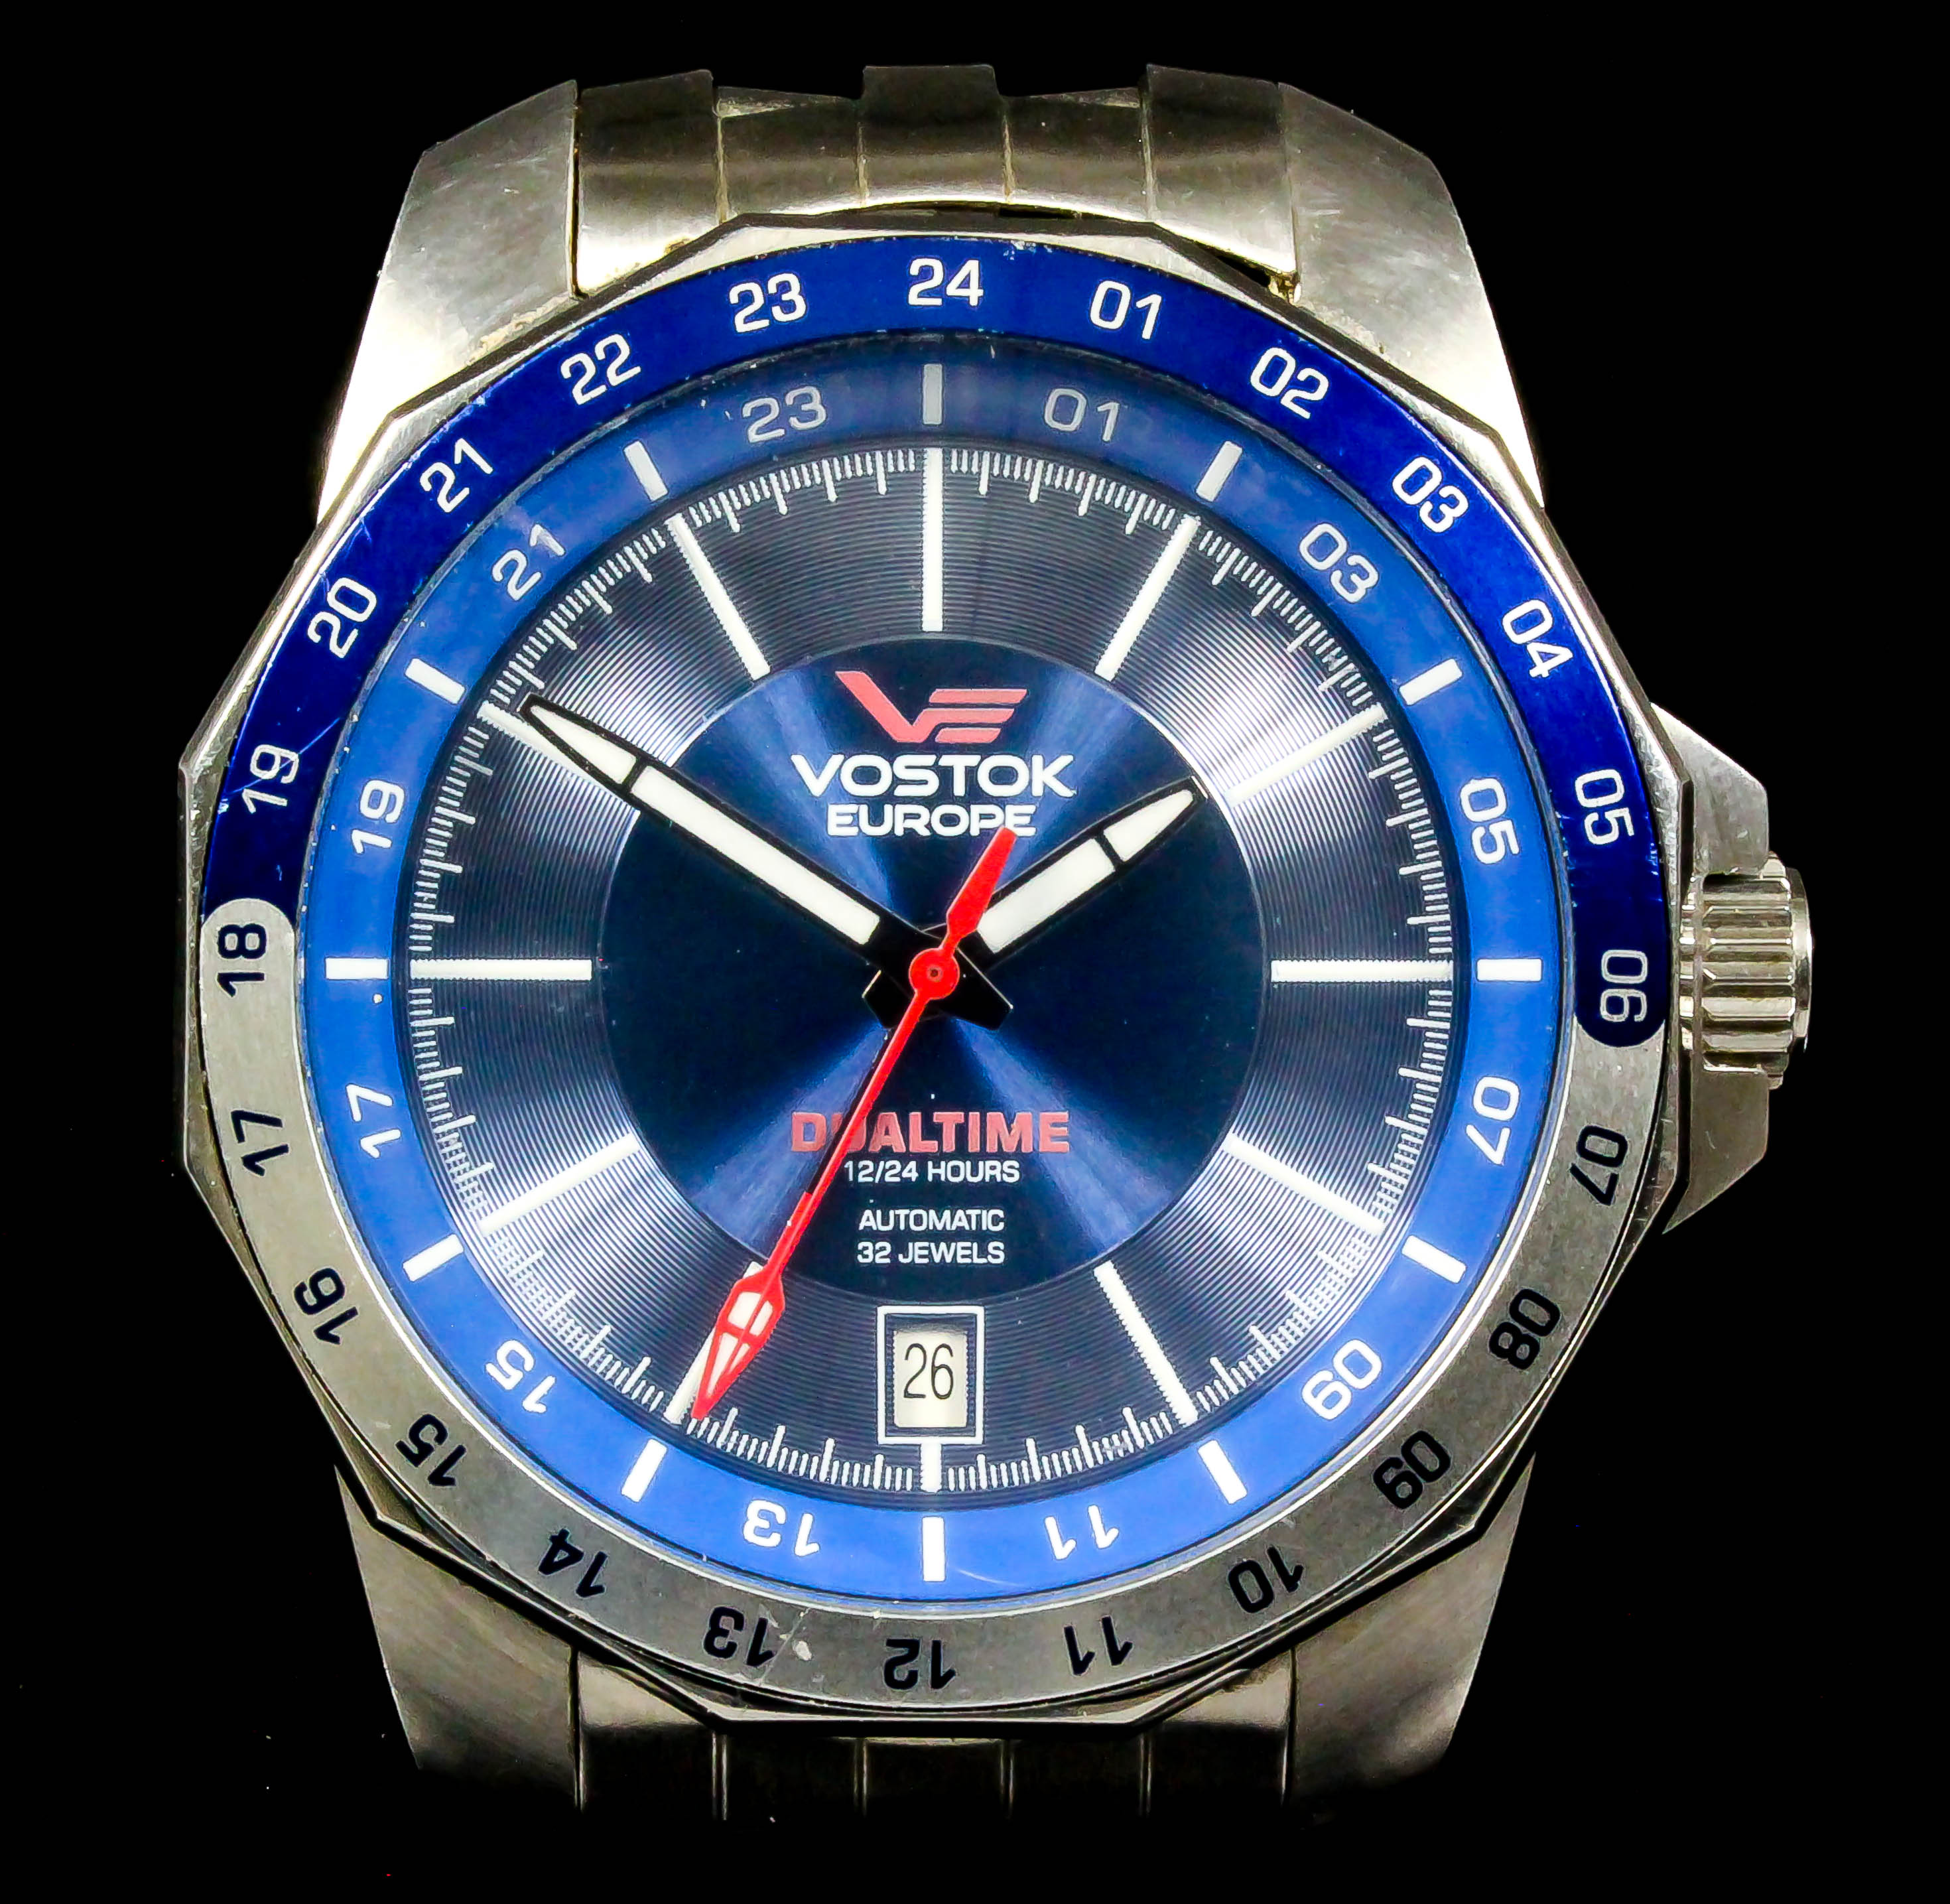 A gentleman's automatic "Dual time" wristwatch by Vostok, the blue face with white baton numerals,